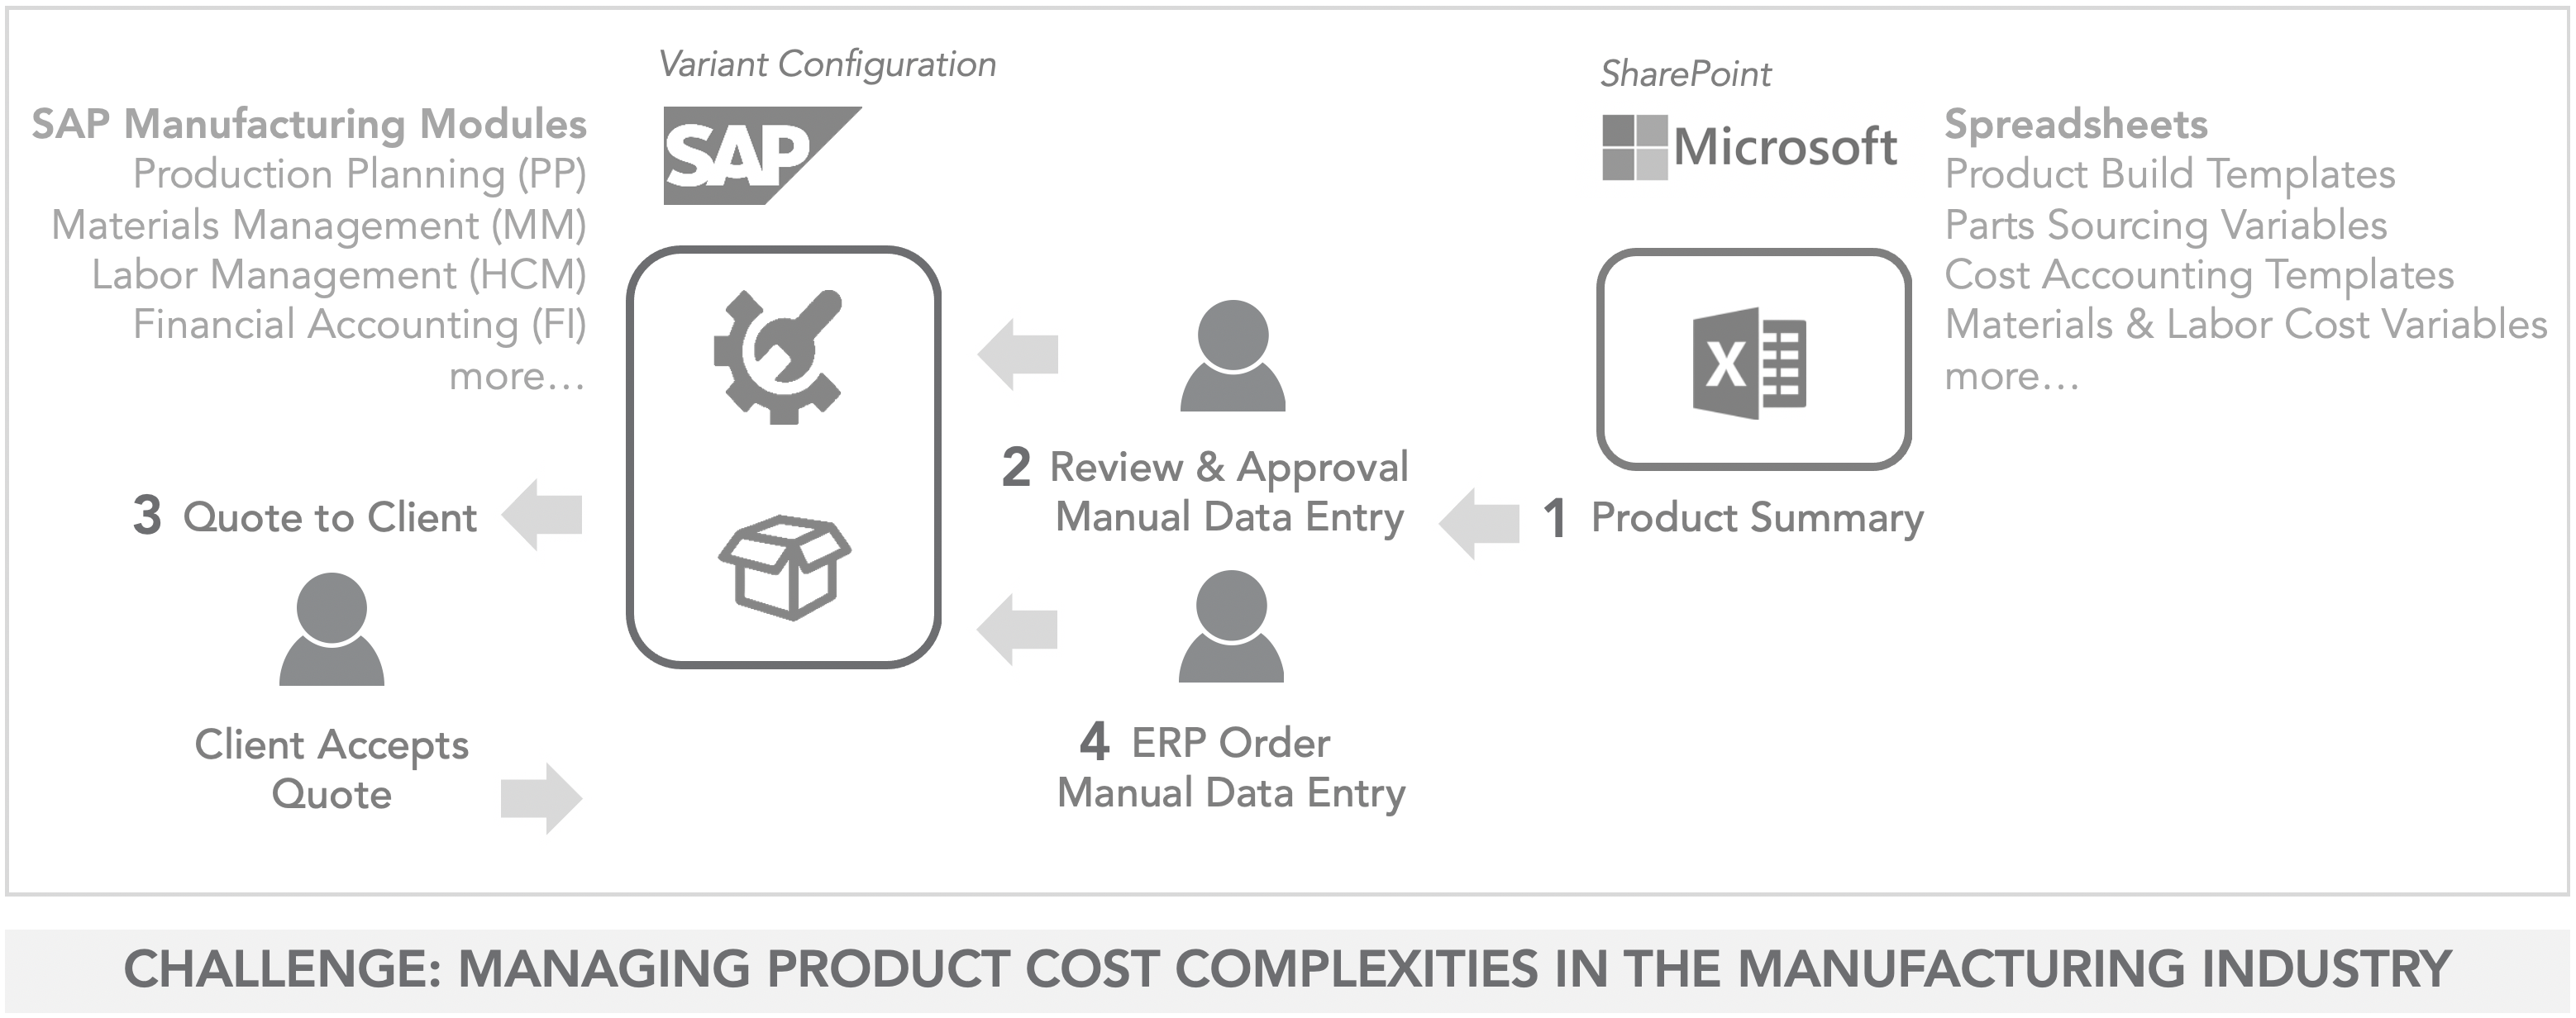 Managing Product Cost Complexities in the Manufacturing Industry